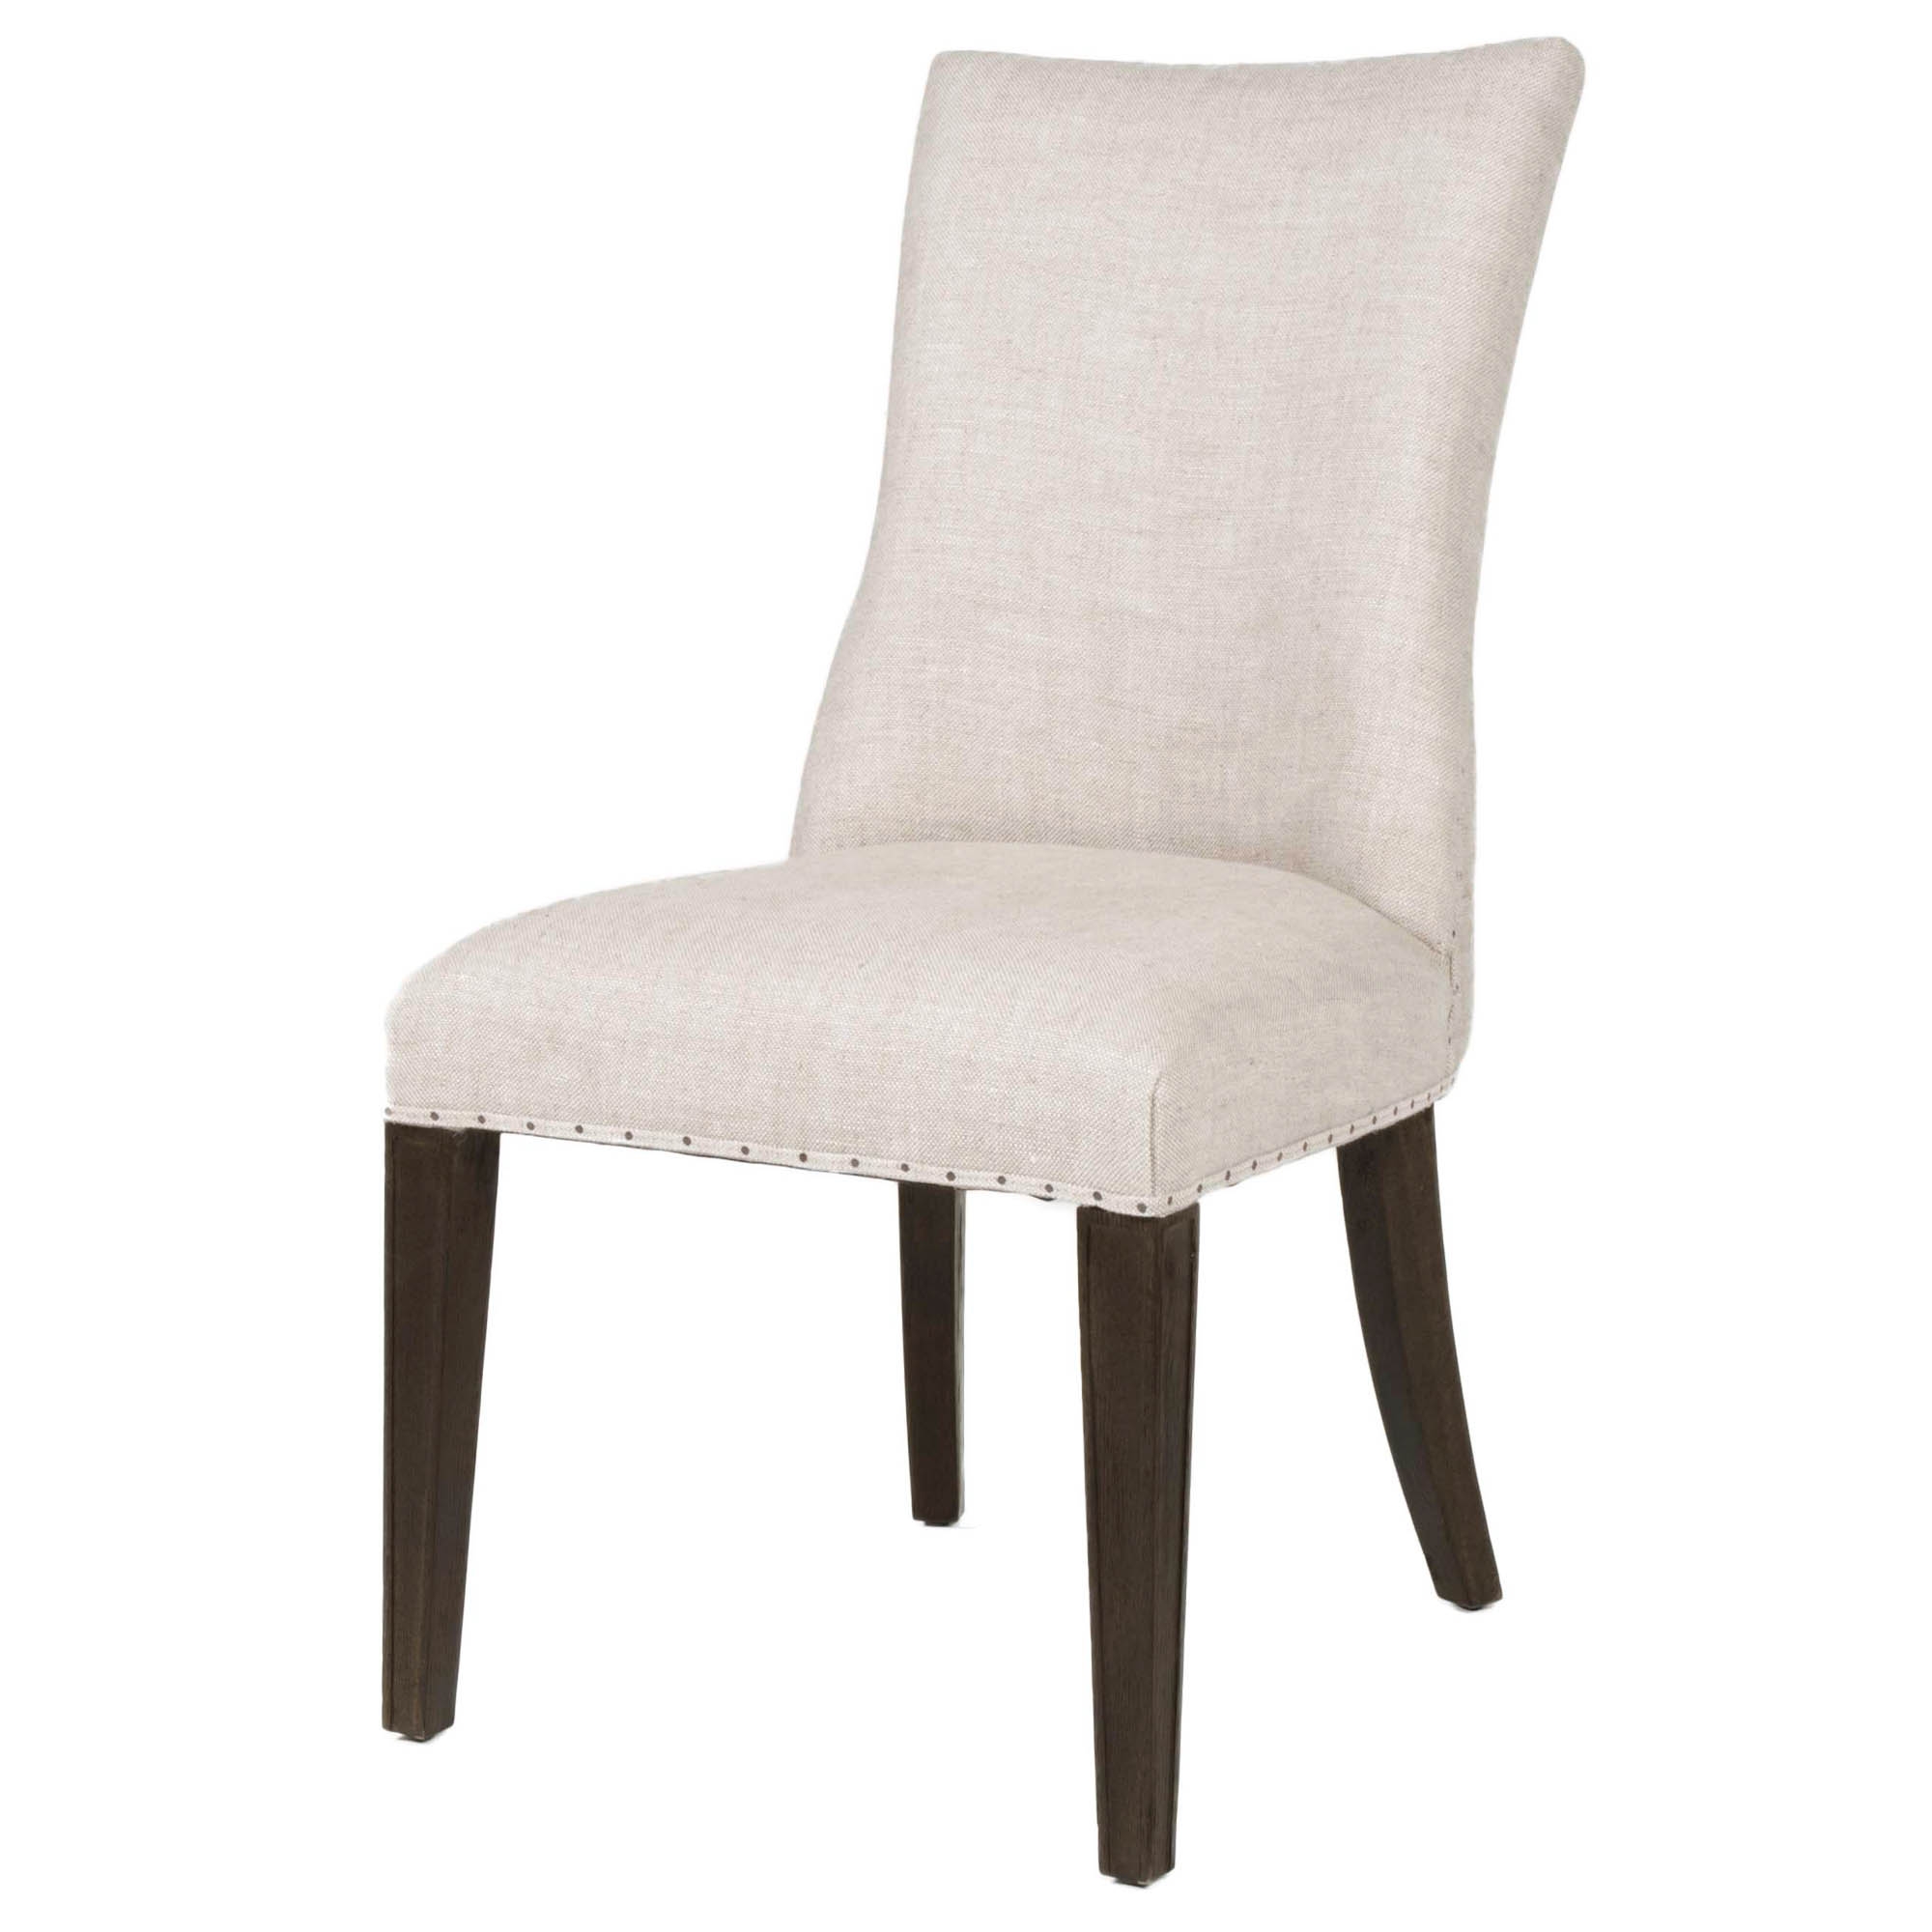 Lourdes Dining Chair, Set of 2 - Image 1